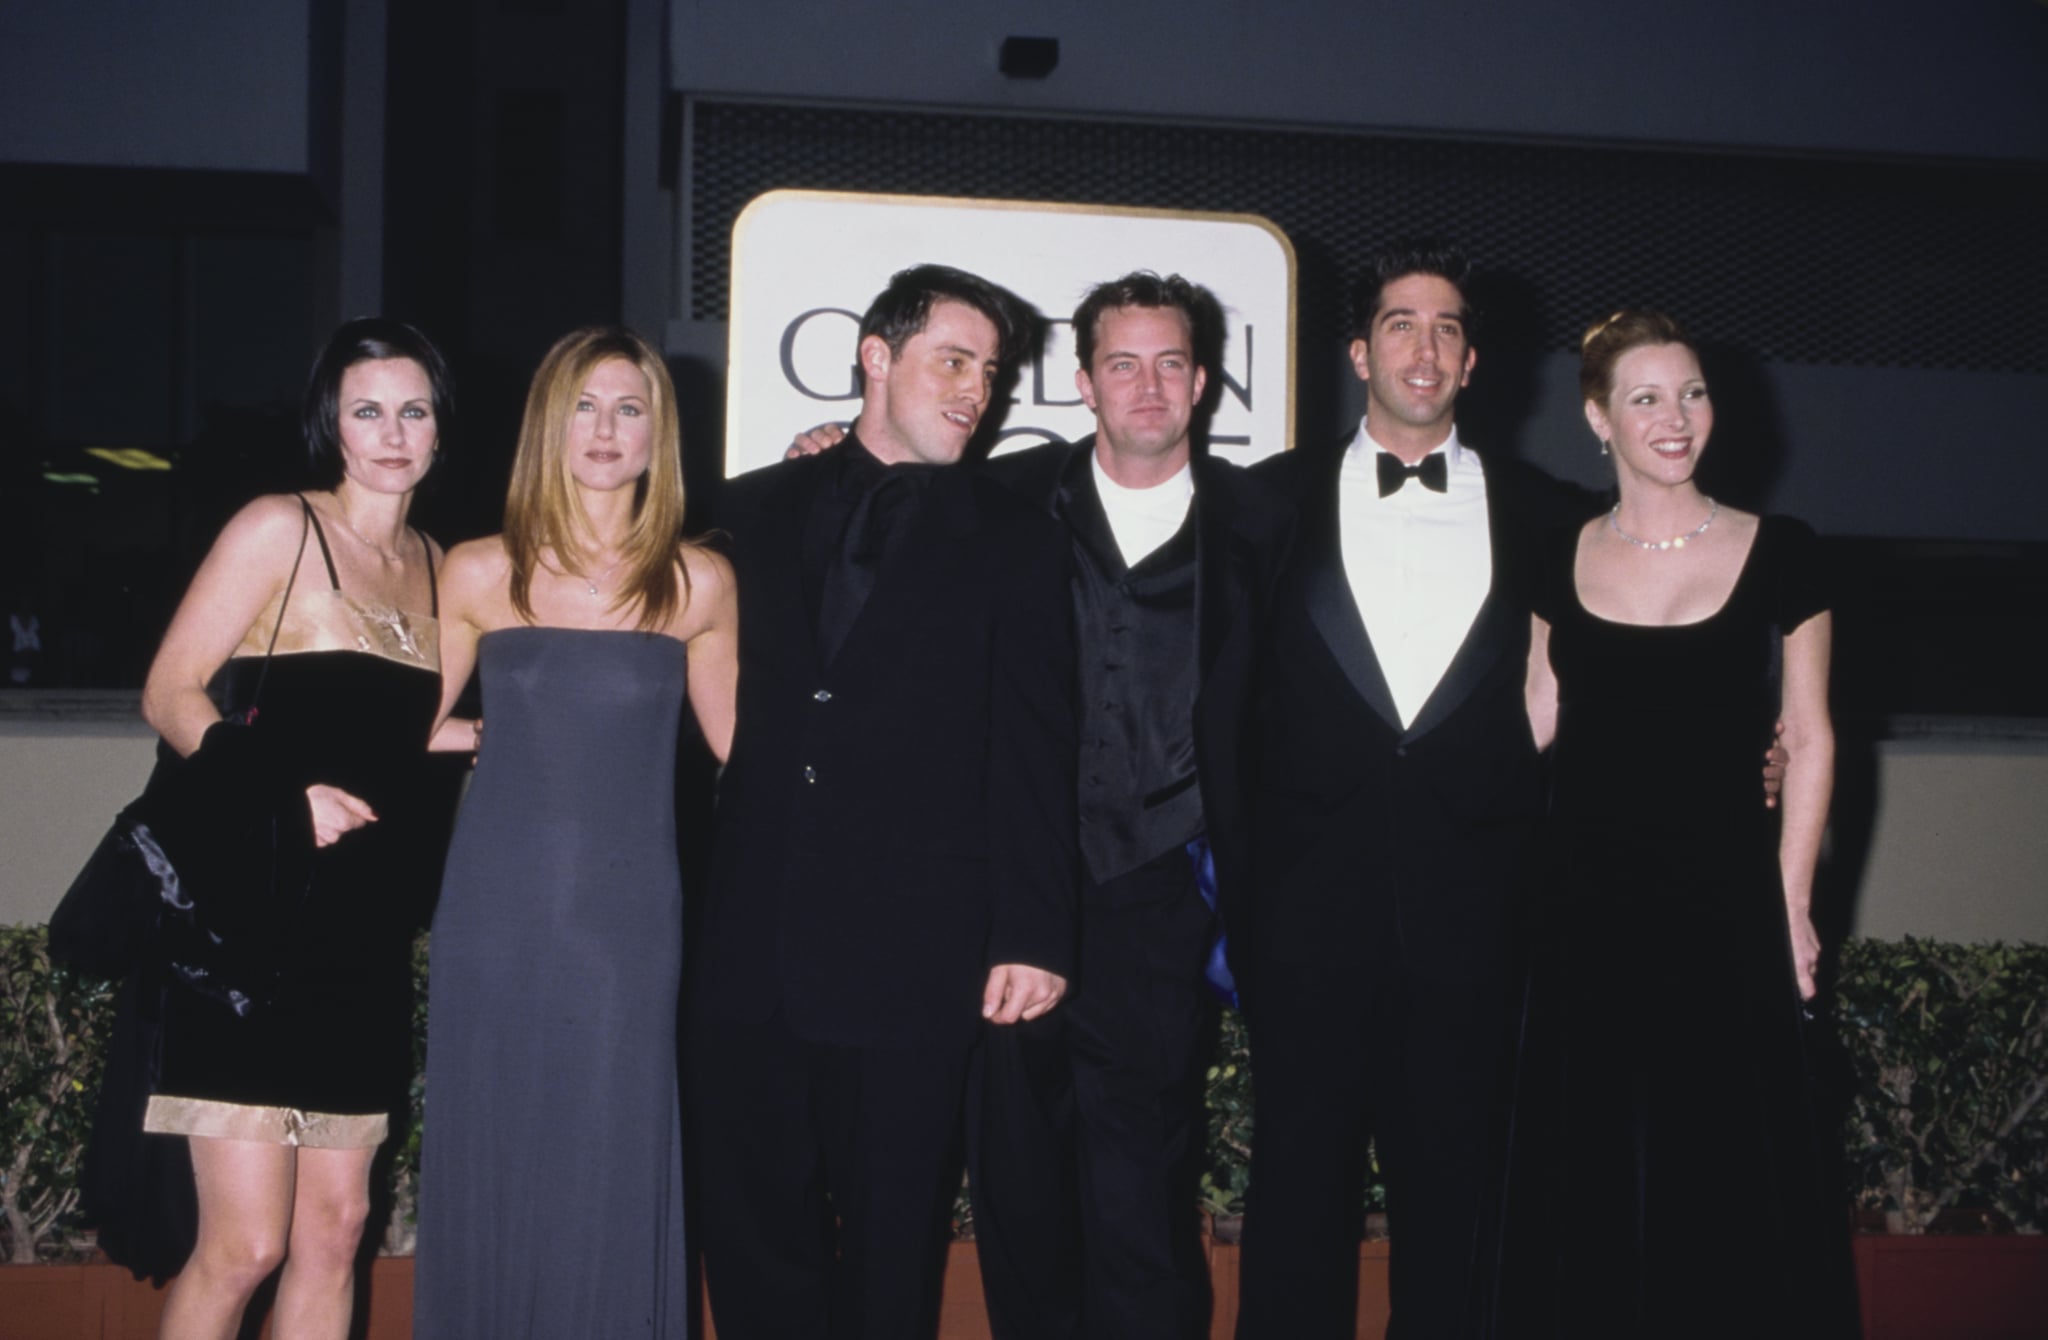 The cast of 'Friends' (American actress Courteney Cox, American actress Jennifer Aniston, American actor and comedian Matt LeBlanc, American-Canadian actor and comedian Matthew Perry, American actor and comedian David Schwimmer, and American actress and comedian Lisa Kudrow) attend the 55th Golden Globe Awards, held at the Beverly Hilton Hotel in Beverly Hills, California, 18th January 1998.  (Photo by Vinnie Zuffante/Getty Images)